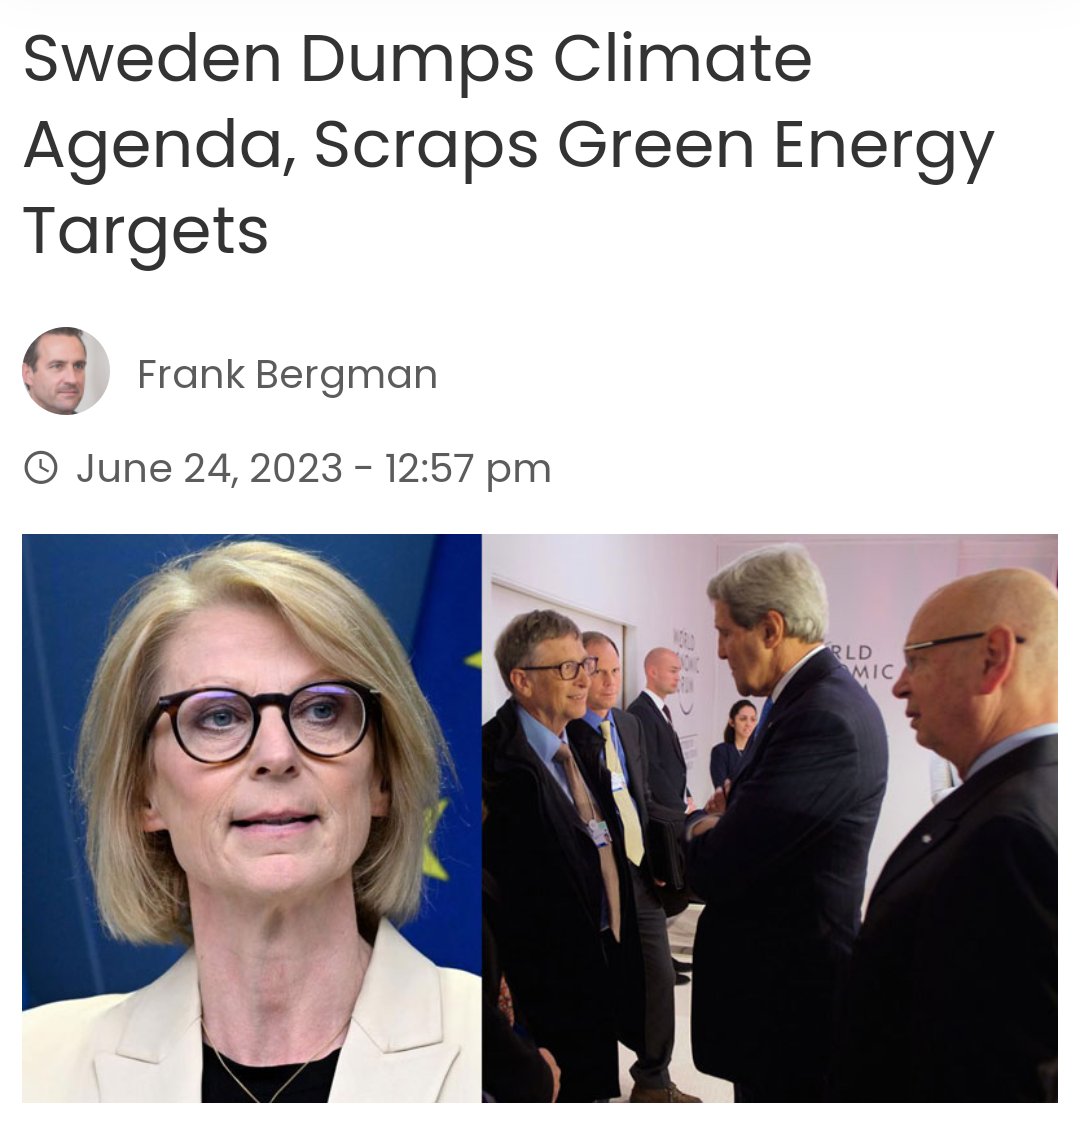 Sweden has just dealt a severe blow to the globalist climate agenda by scraping its green energy targets

In a statement announcing the new policy in the Swedish Parliament, Finance Minister Elisabeth Svantesson warned that the Scandinavian nation needs “a stable energy system.”